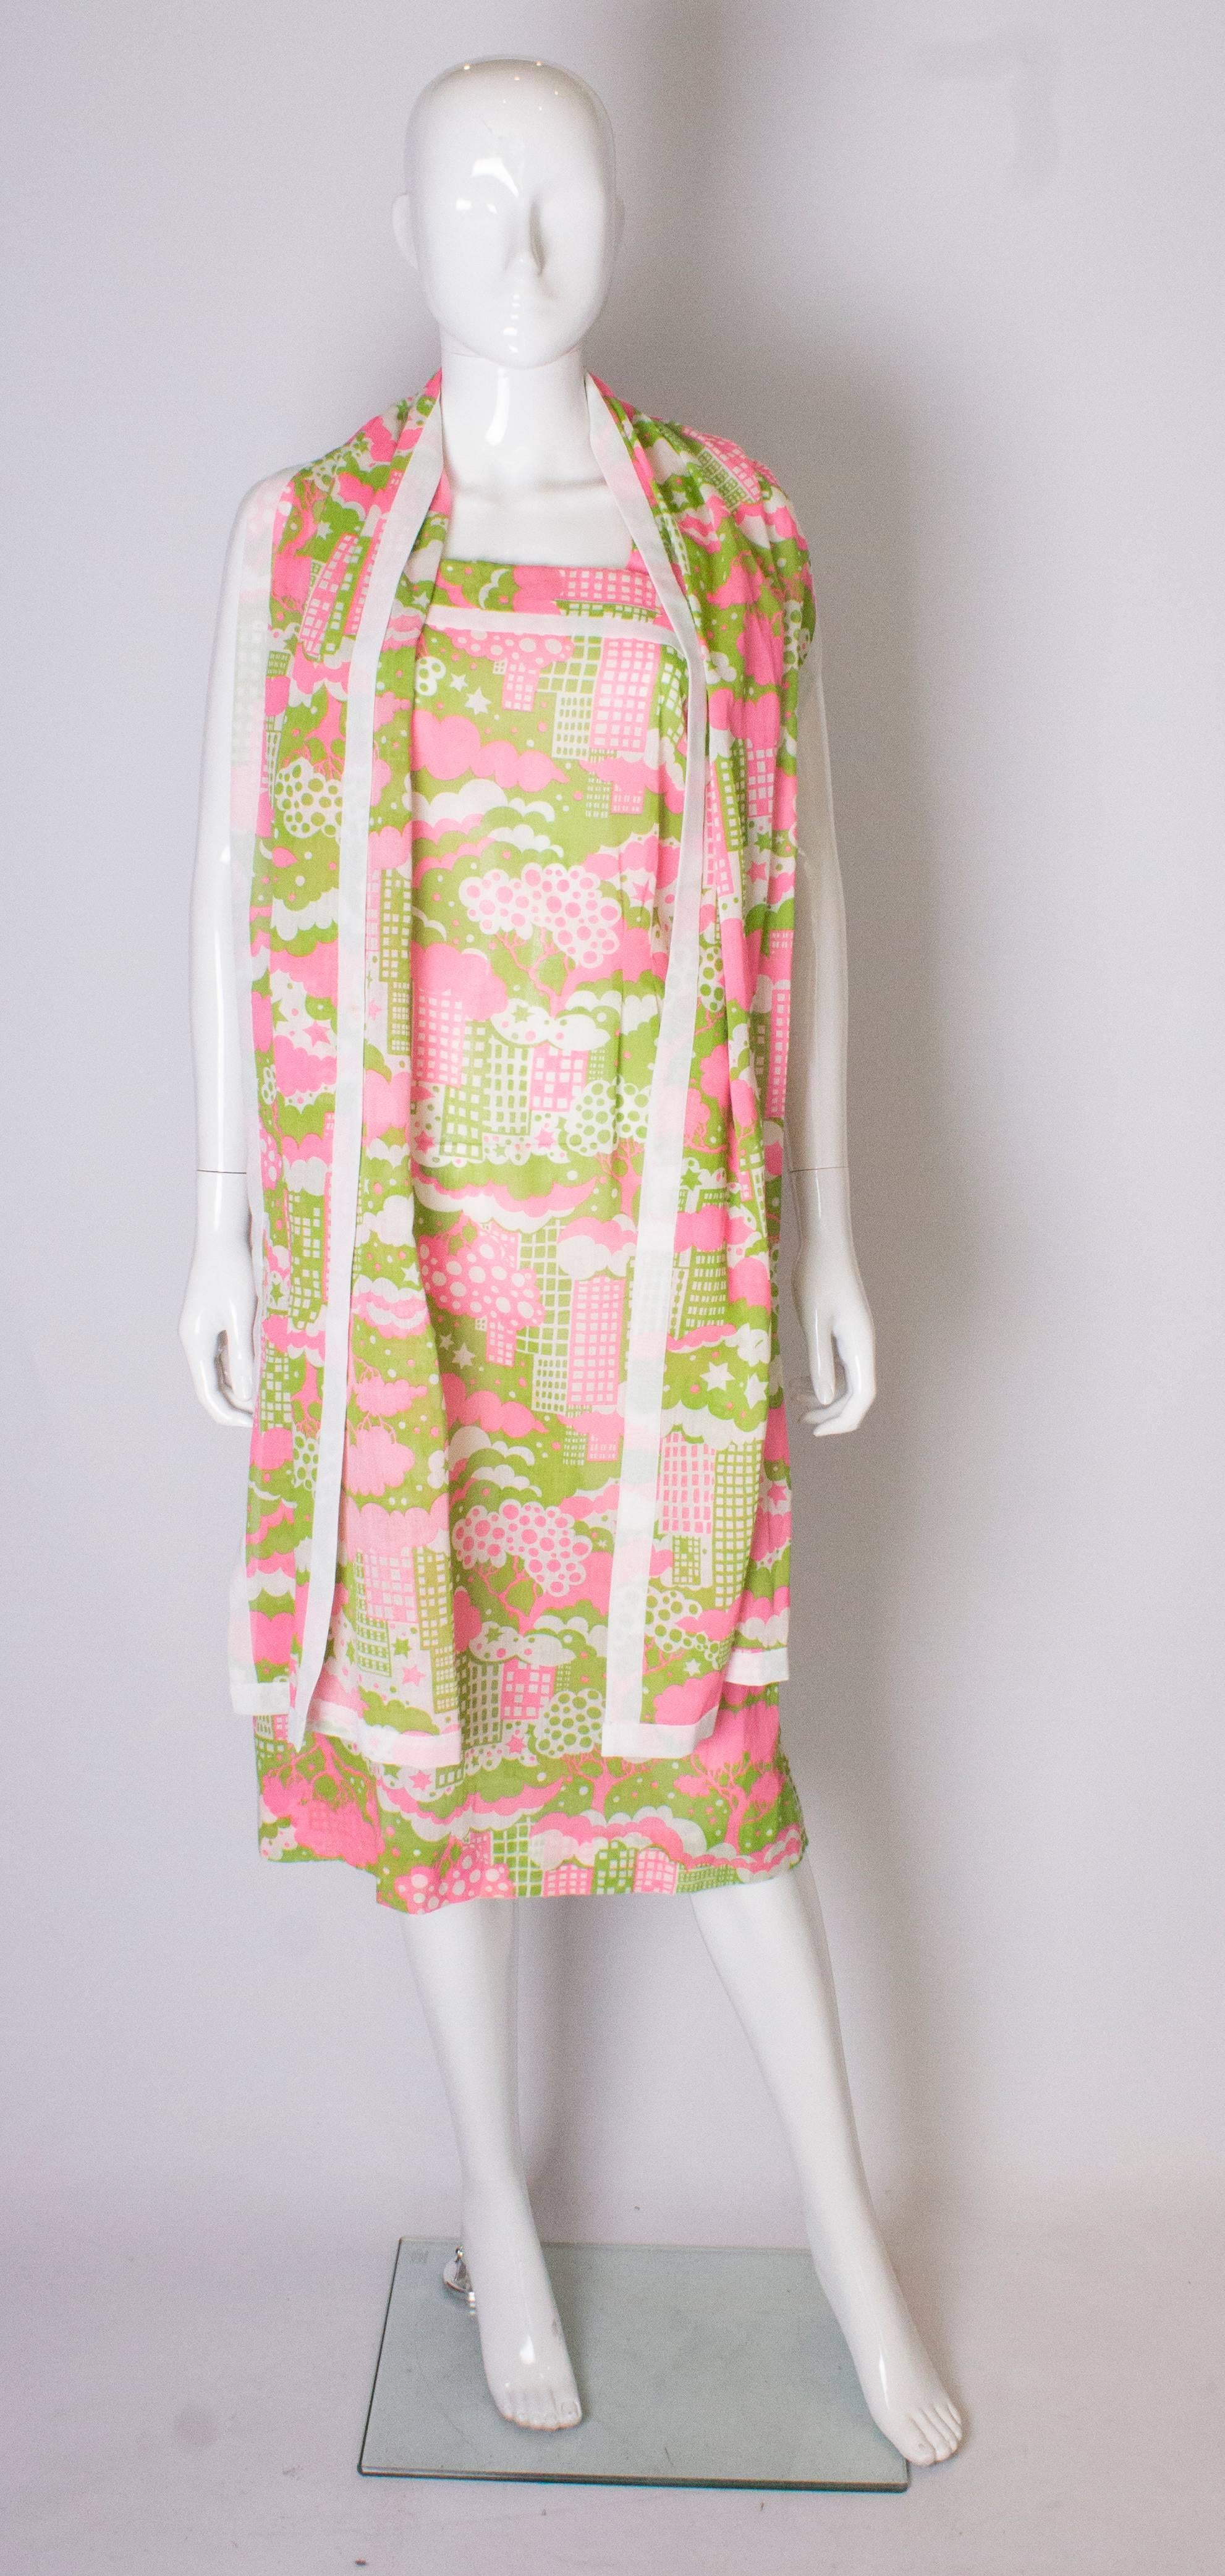 A fun  vintage abstract print  sundress with matching scarf. The dress is a print of pink, white and sage green ,  with a white trim.  It has two straps and a central back zip.
The scarf is the same fabric and measures 88'' x 18''.